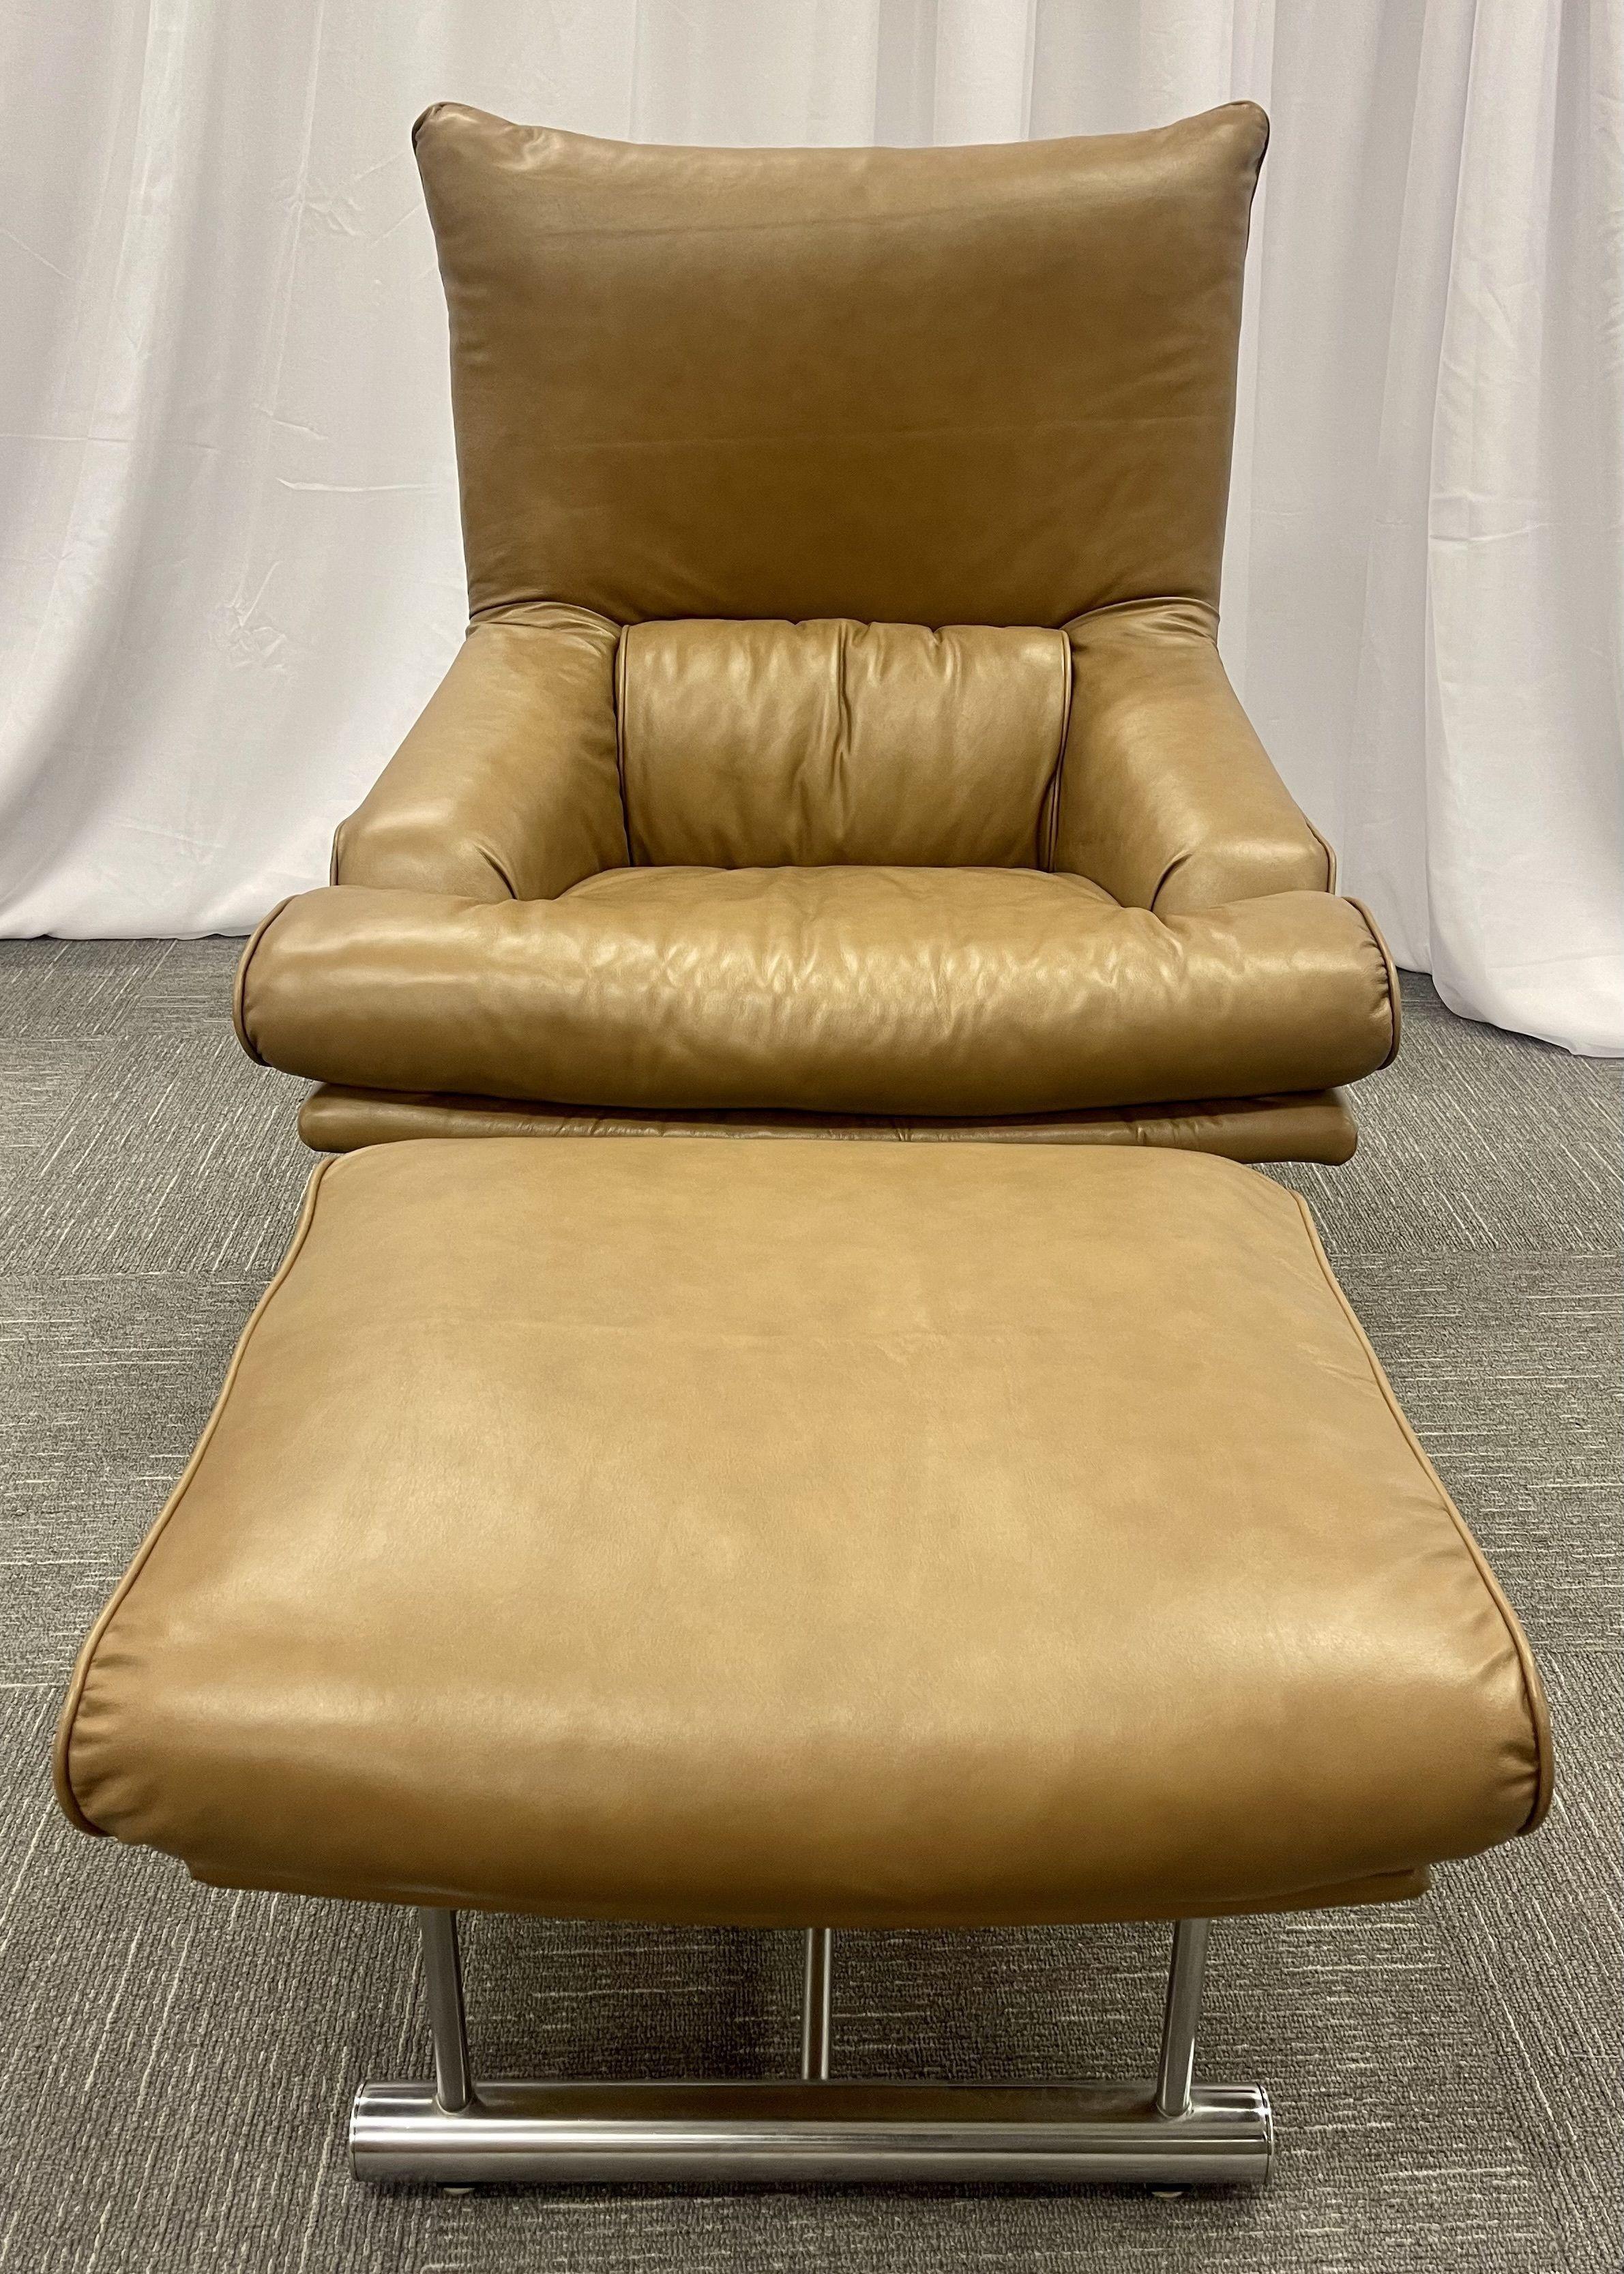 Vintage leather swivel, lounge chair with ottoman, percival lafer style, steel. This newly upholstered leather lounge chair or recliner is imply stunning. Italian having a custom sturdy base this simply stunning sleek and stylish chair and ottoman